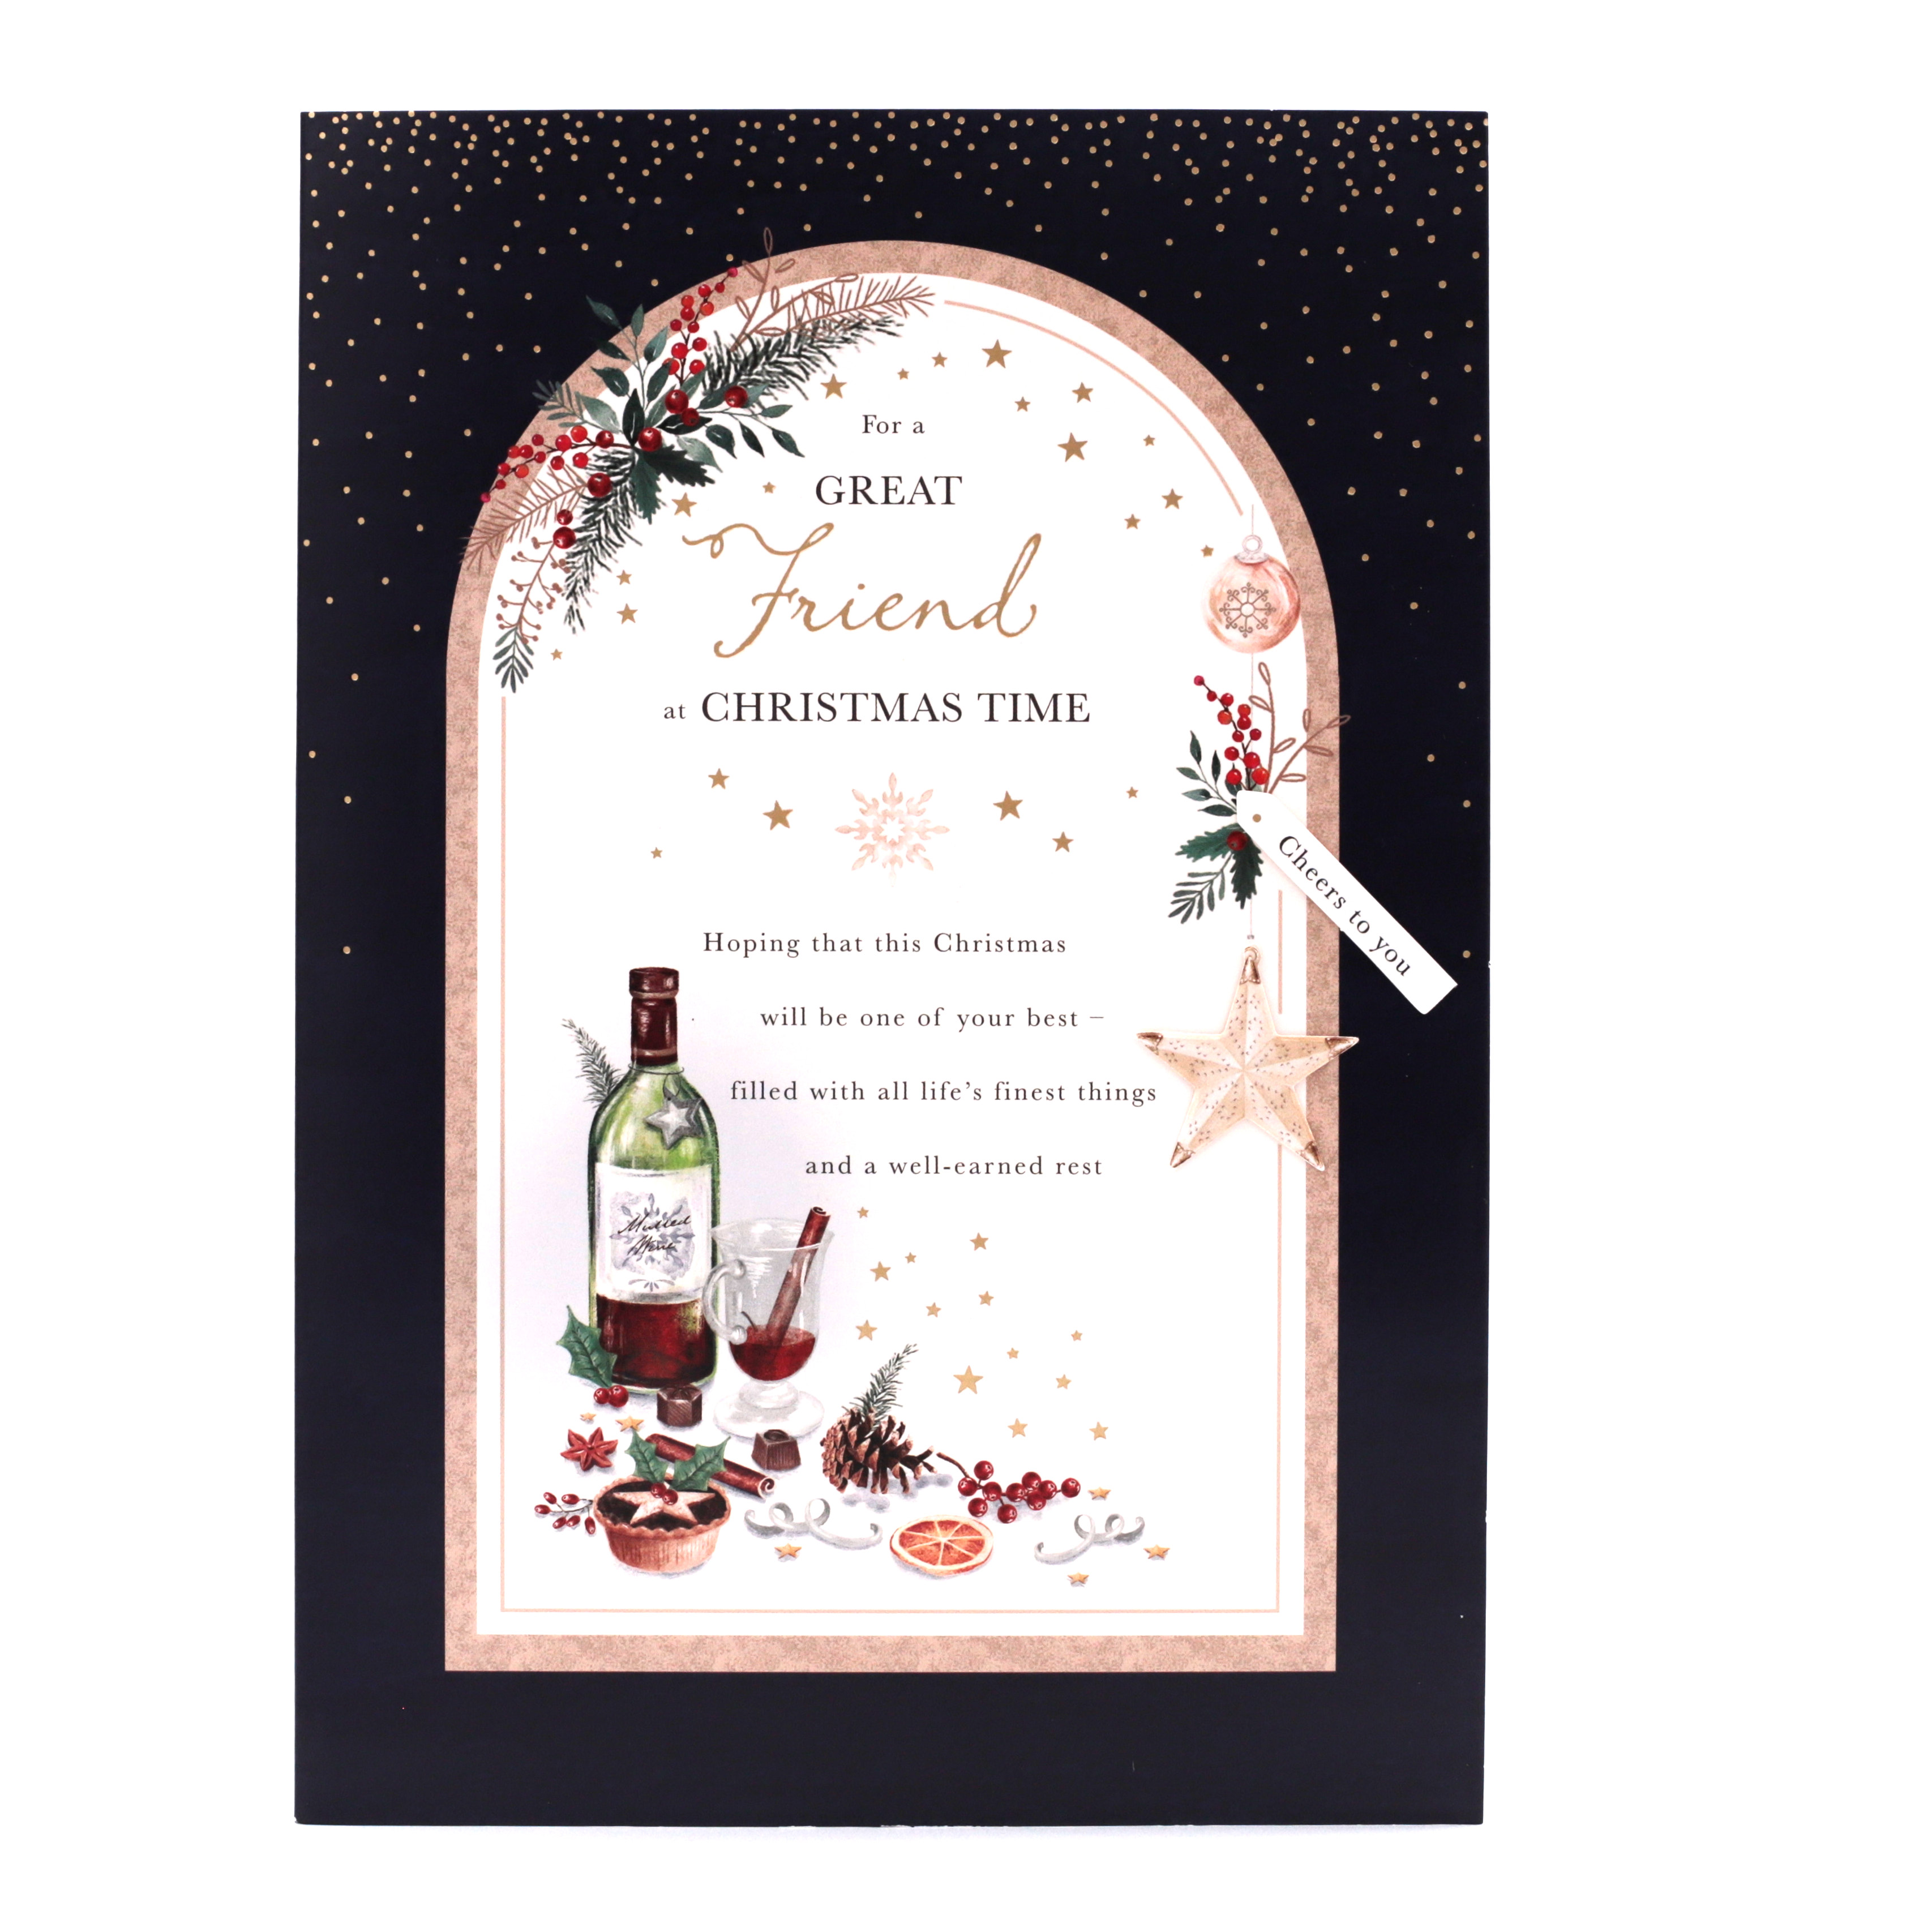 Christmas Card - Great Friend, Traditional Verse